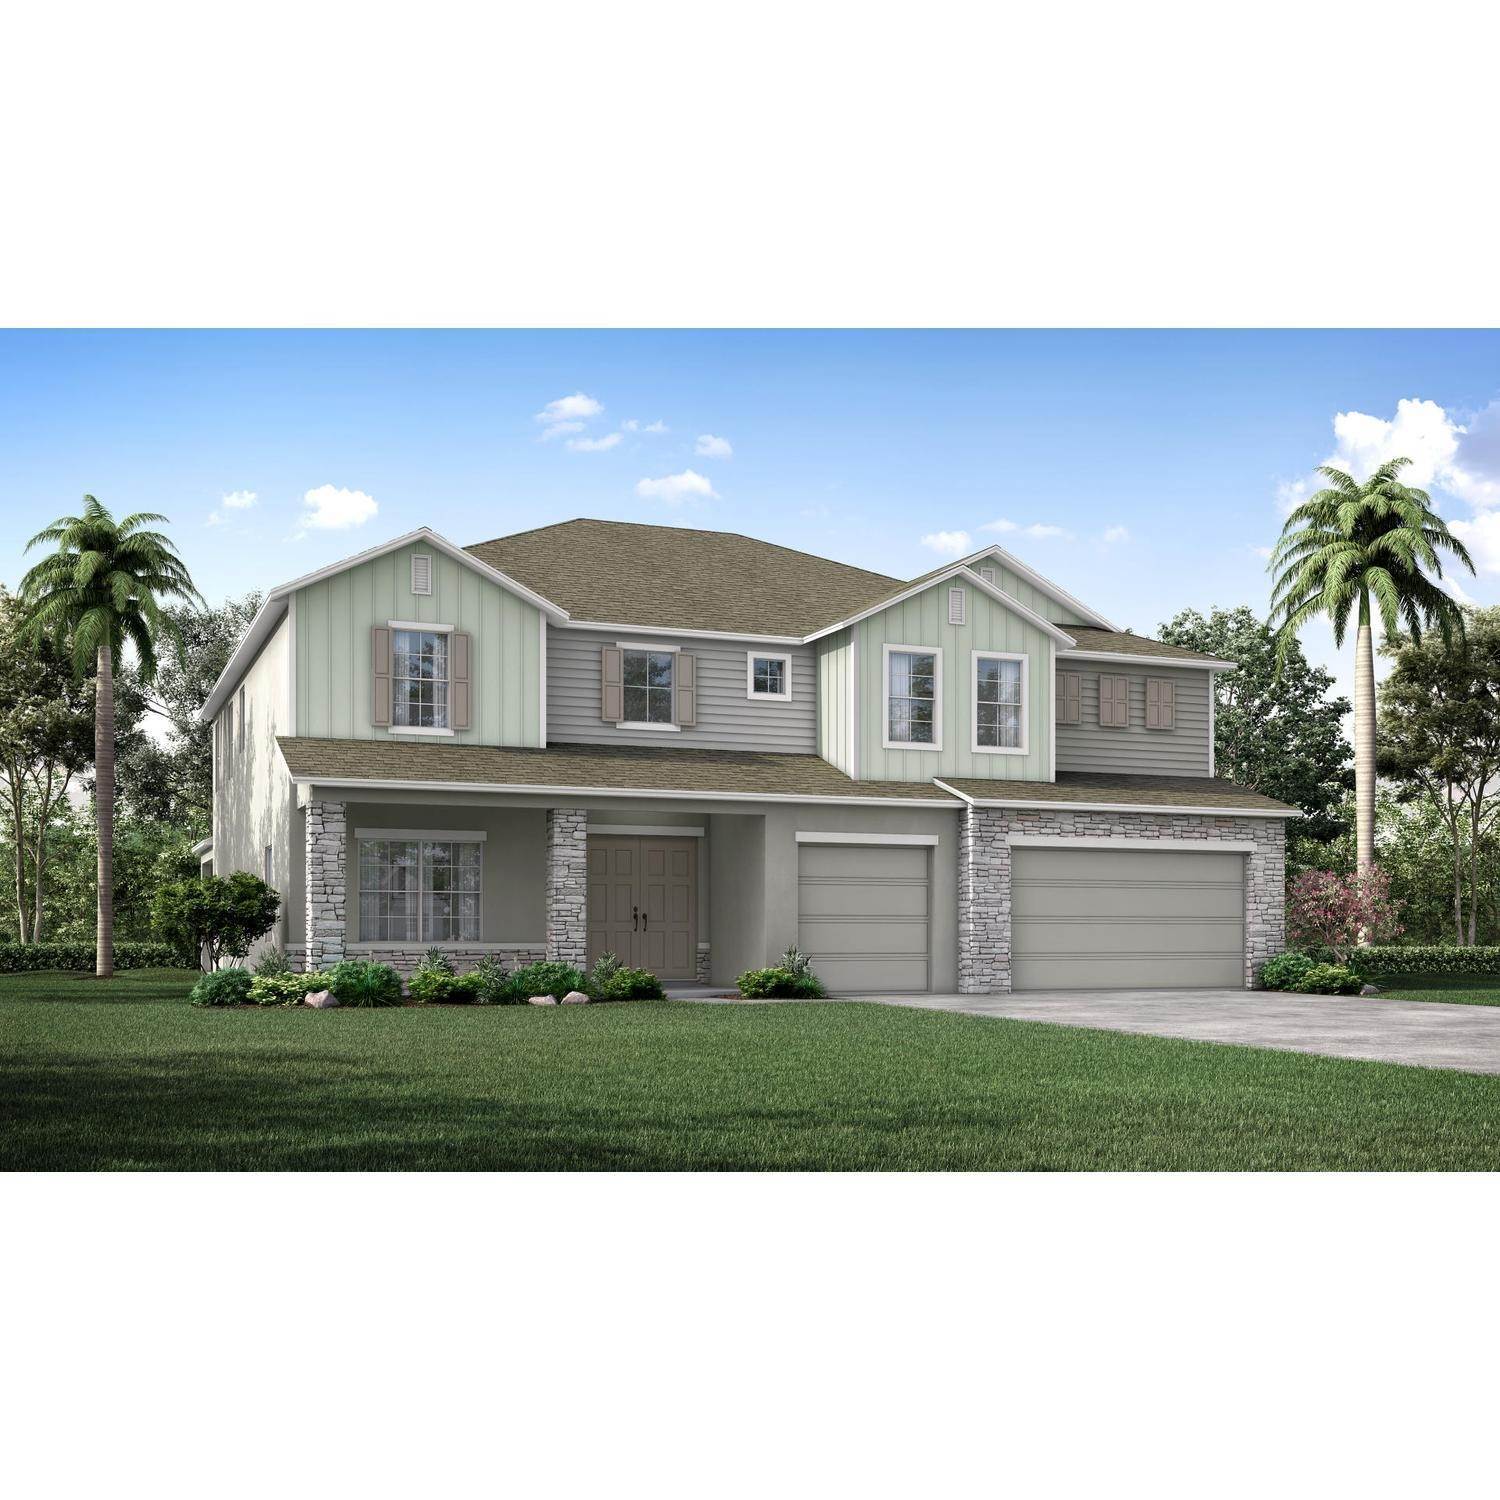 Single Family for Sale at Fox Meadows - Verona 1521 Lake Foxmeadow Rd MIDDLEBURG, FLORIDA 32068 UNITED STATES